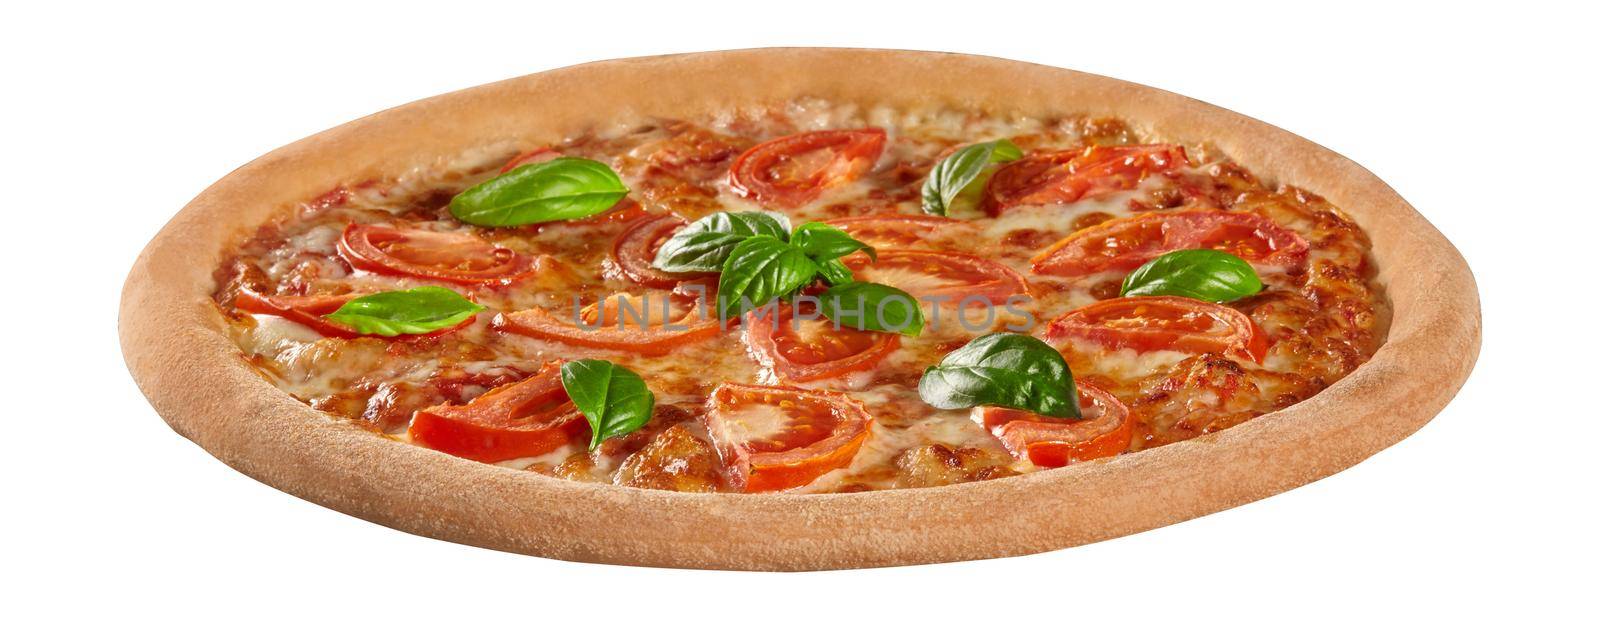 Pizza Margherita with melted mozzarella, tomatoes and fresh basil leaves by nazarovsergey